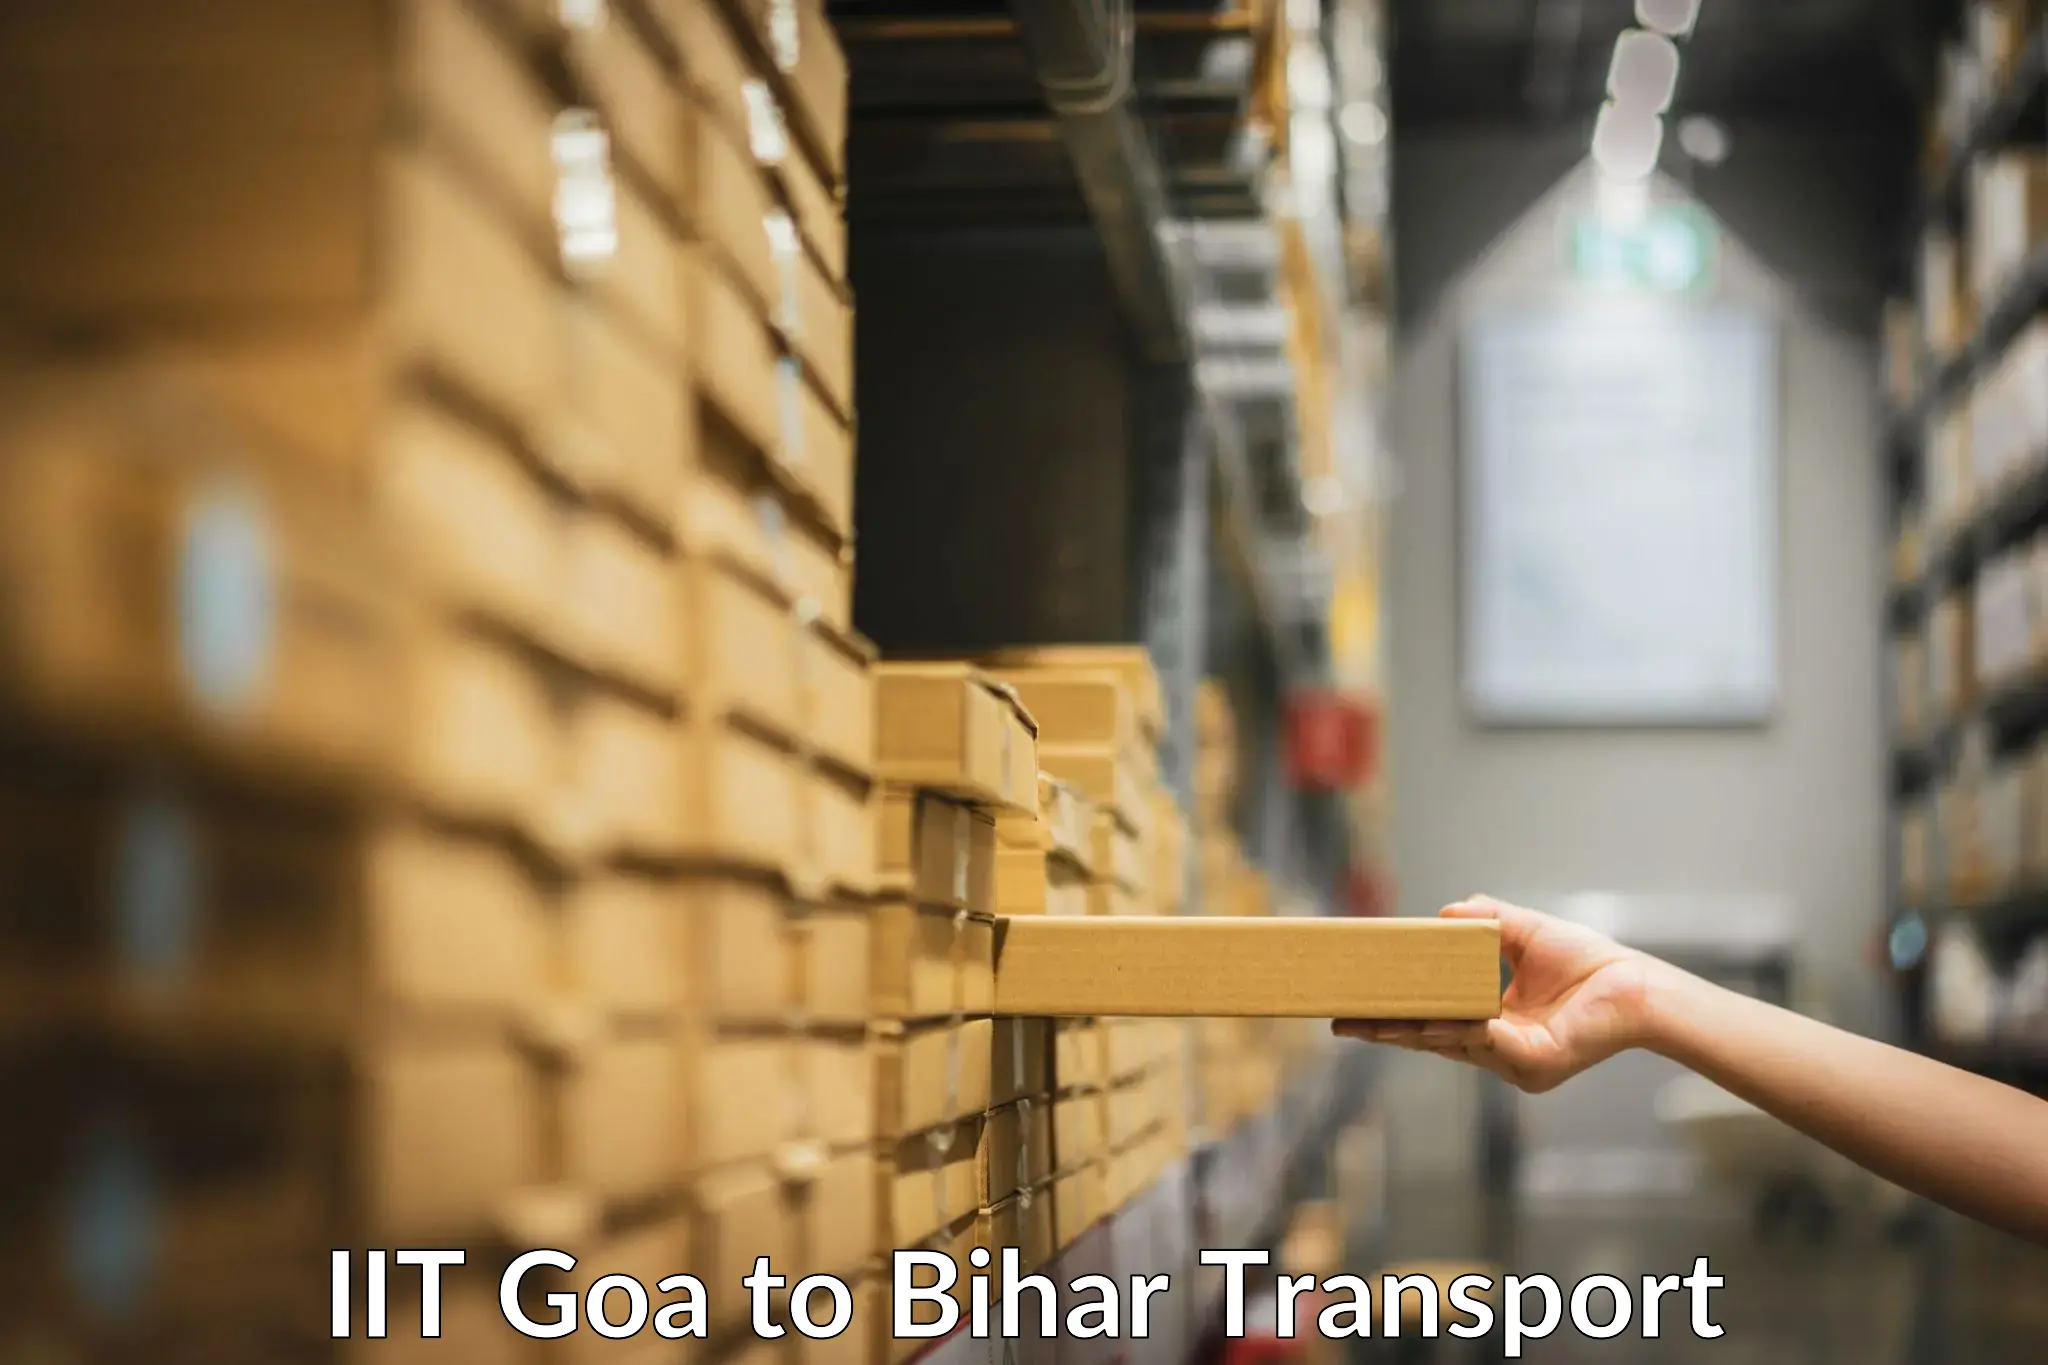 Transport bike from one state to another IIT Goa to Maranga